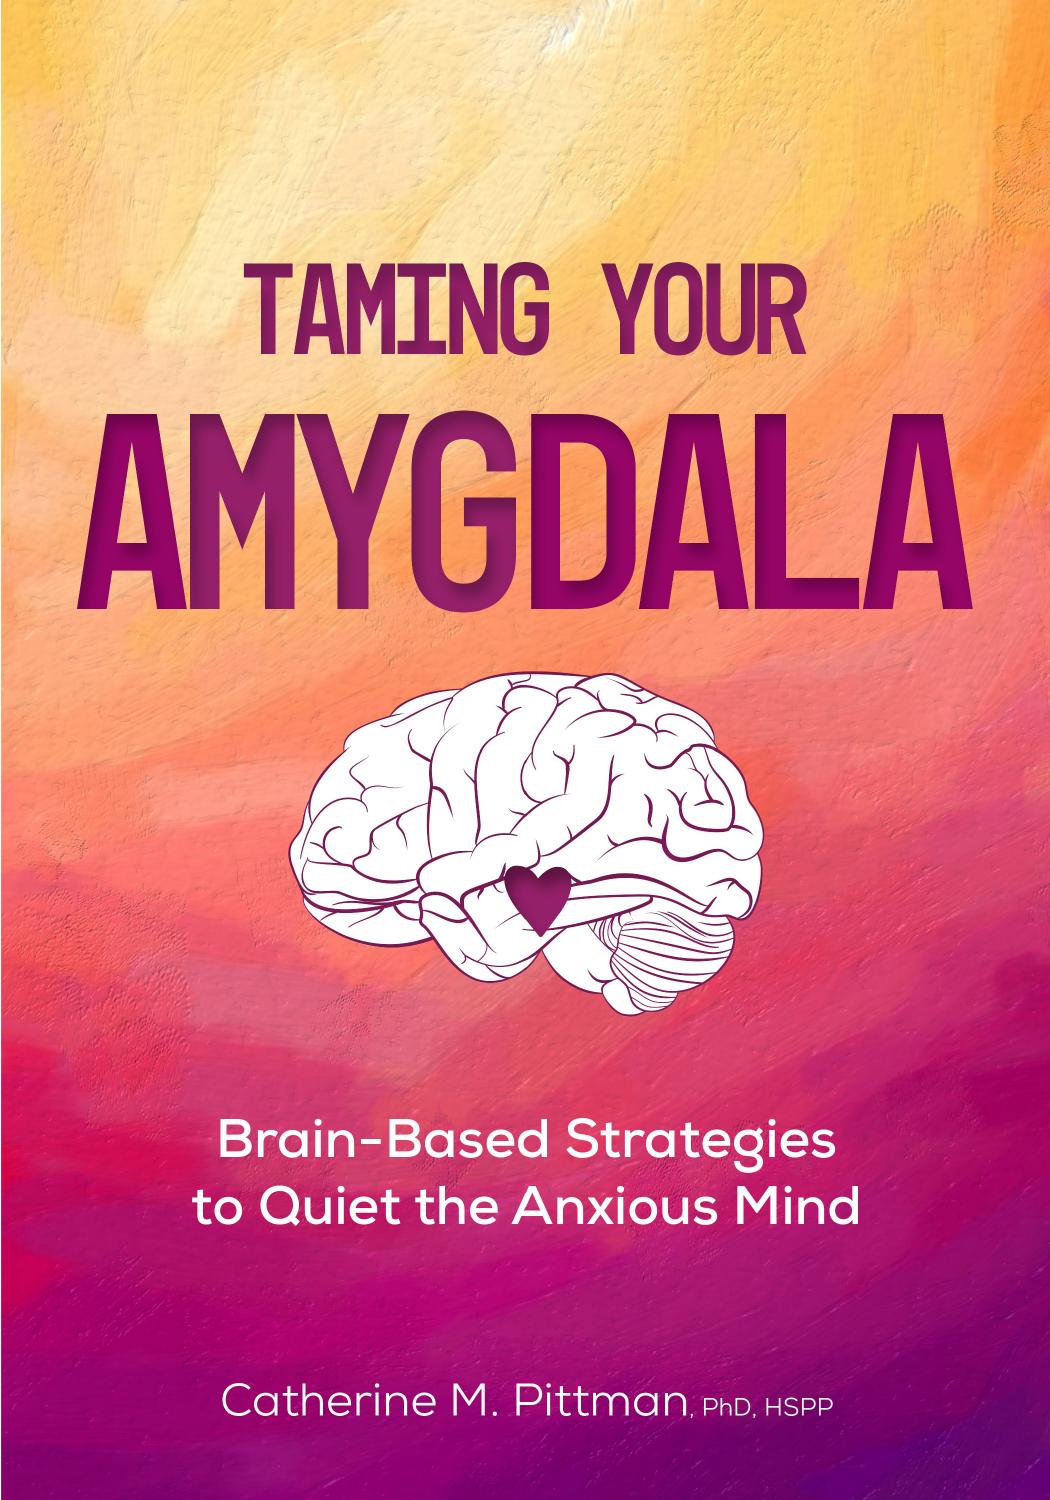 Taming Your Amygdala: Brain-Based Strategies to Quiet the Anxious Mind by Catherine M. Pittman